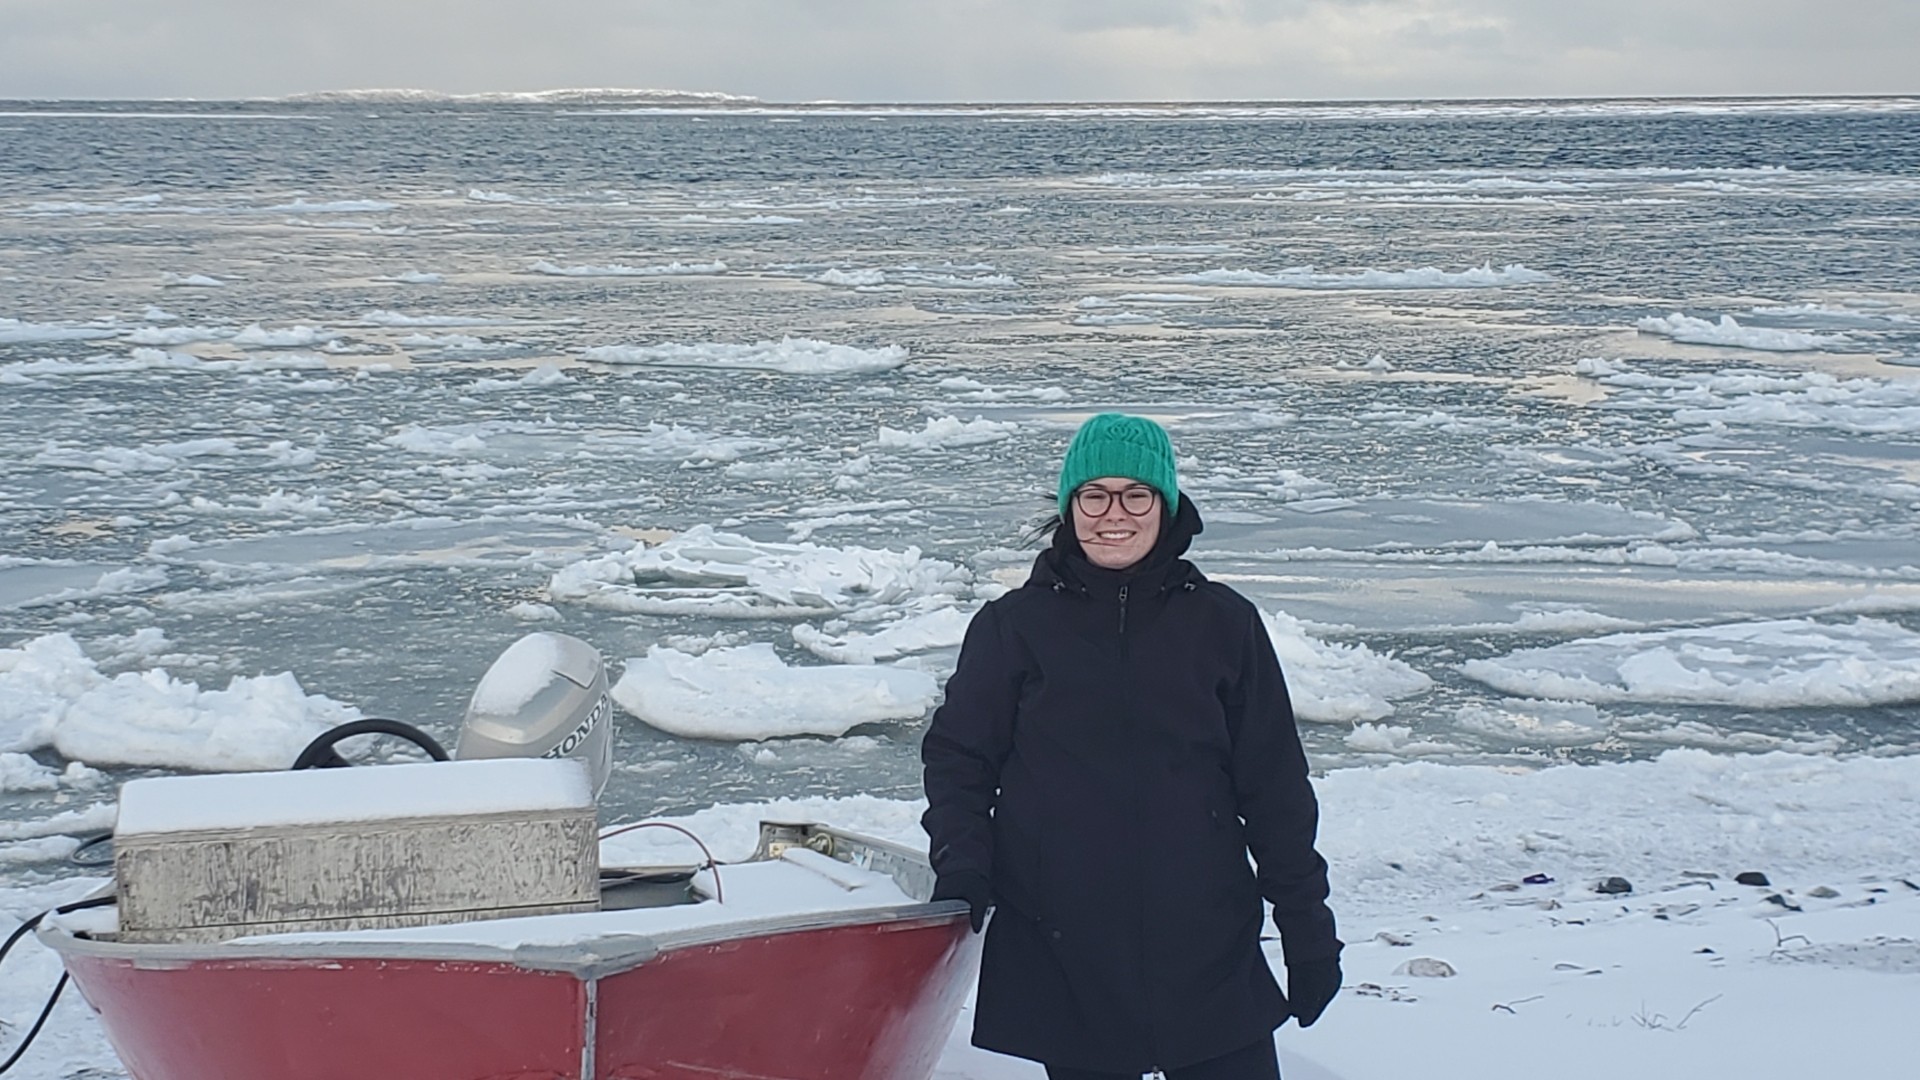 A student standing next to a boat at the edge of icy ocean water